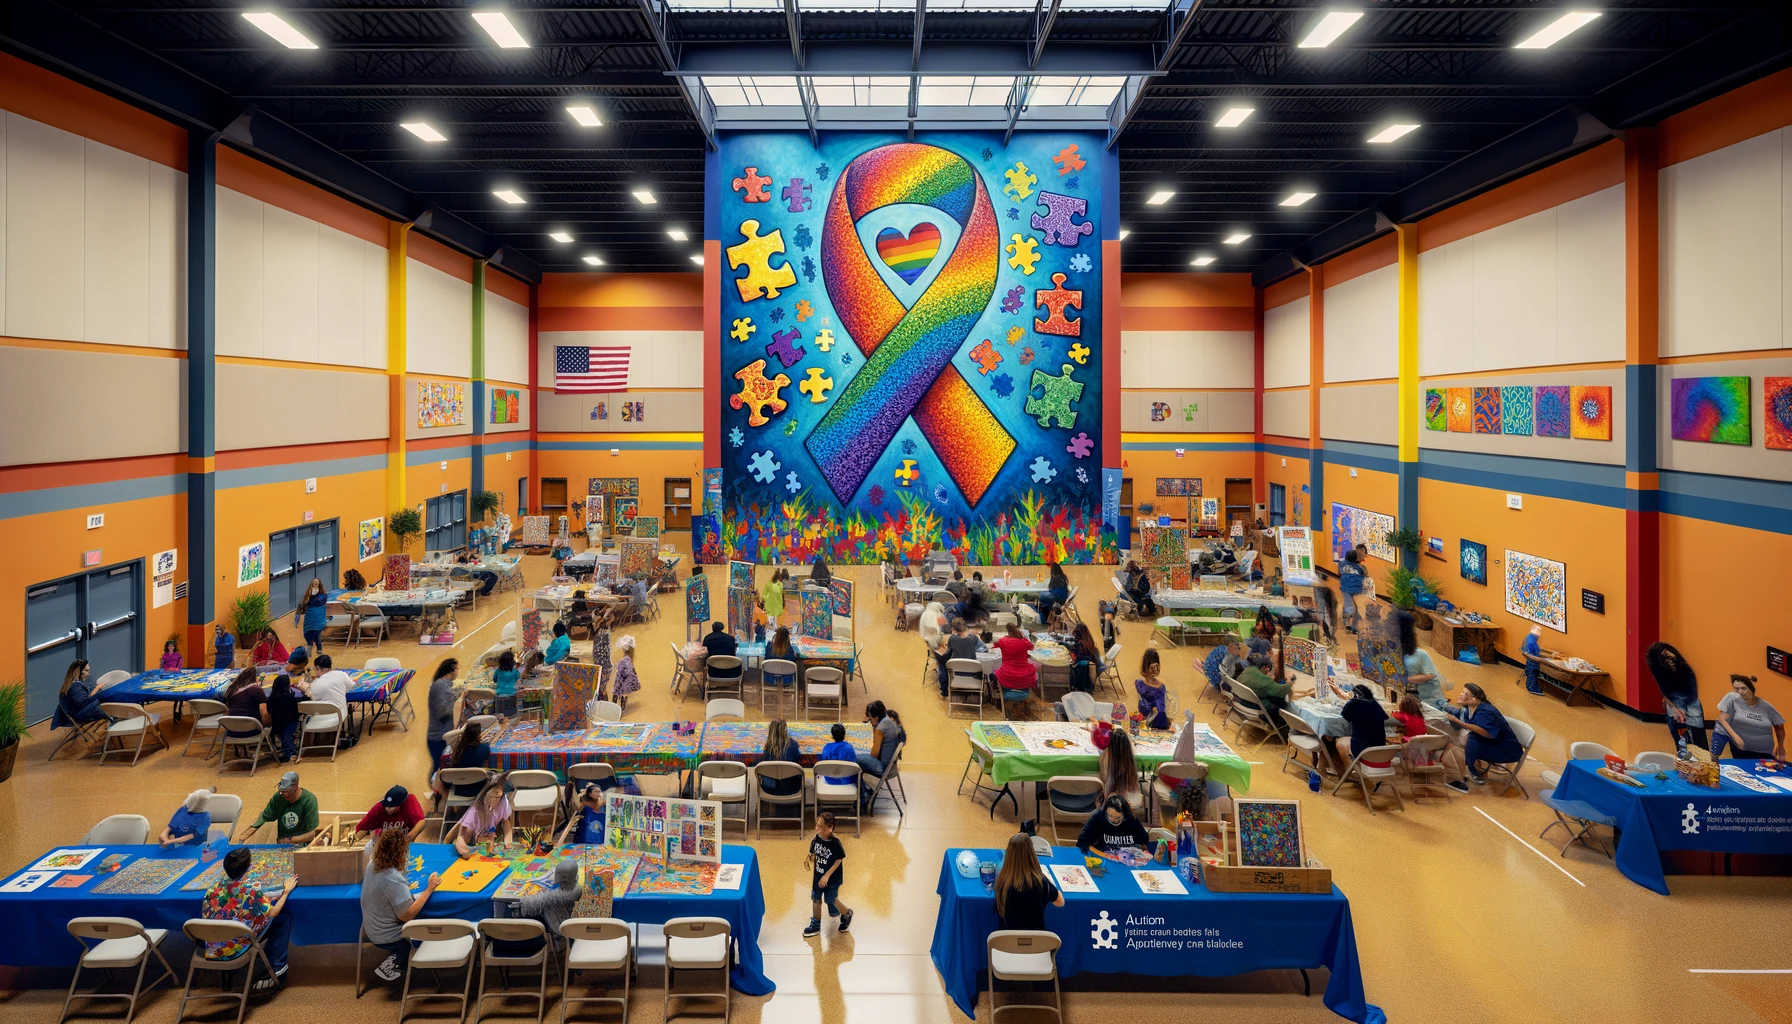 Autism Acceptance and Inclusion- An indoor community center decorated vibrantly for an Autism Awareness event, showcasing a large mural with the puzzle piece ribbon and the rainbow